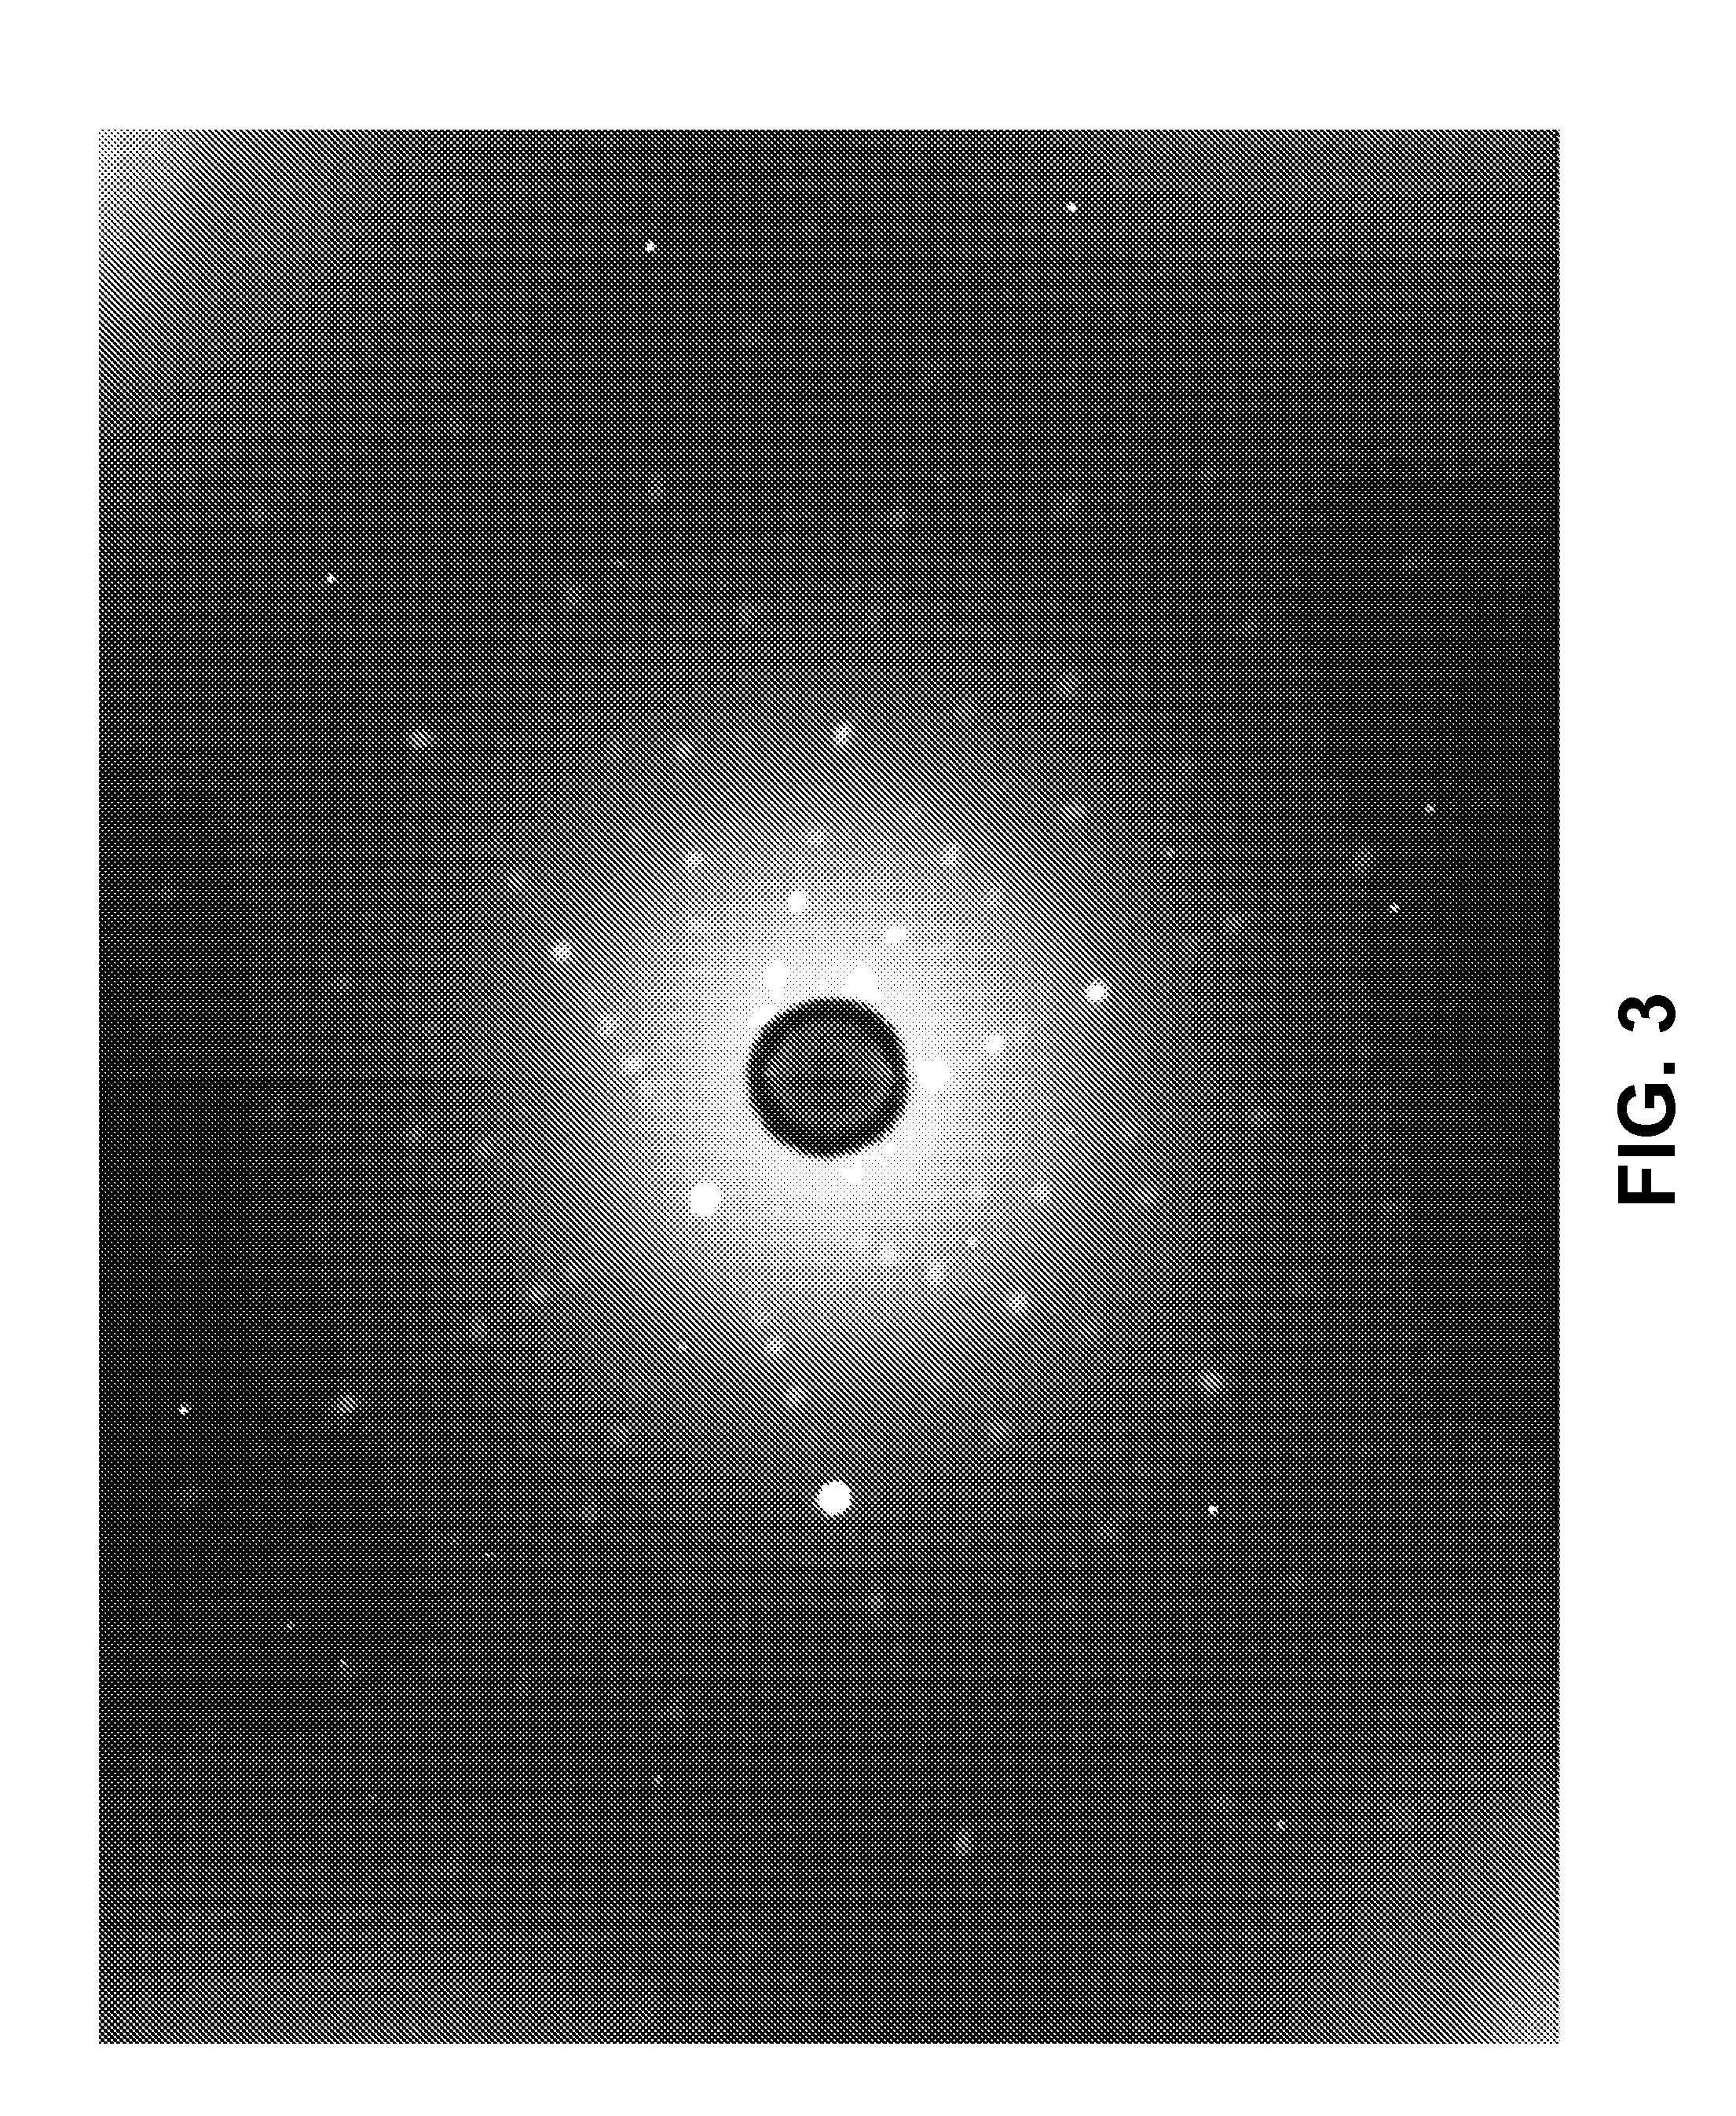 Multi-Component Solid Solution Alloys having High Mixing Entropy